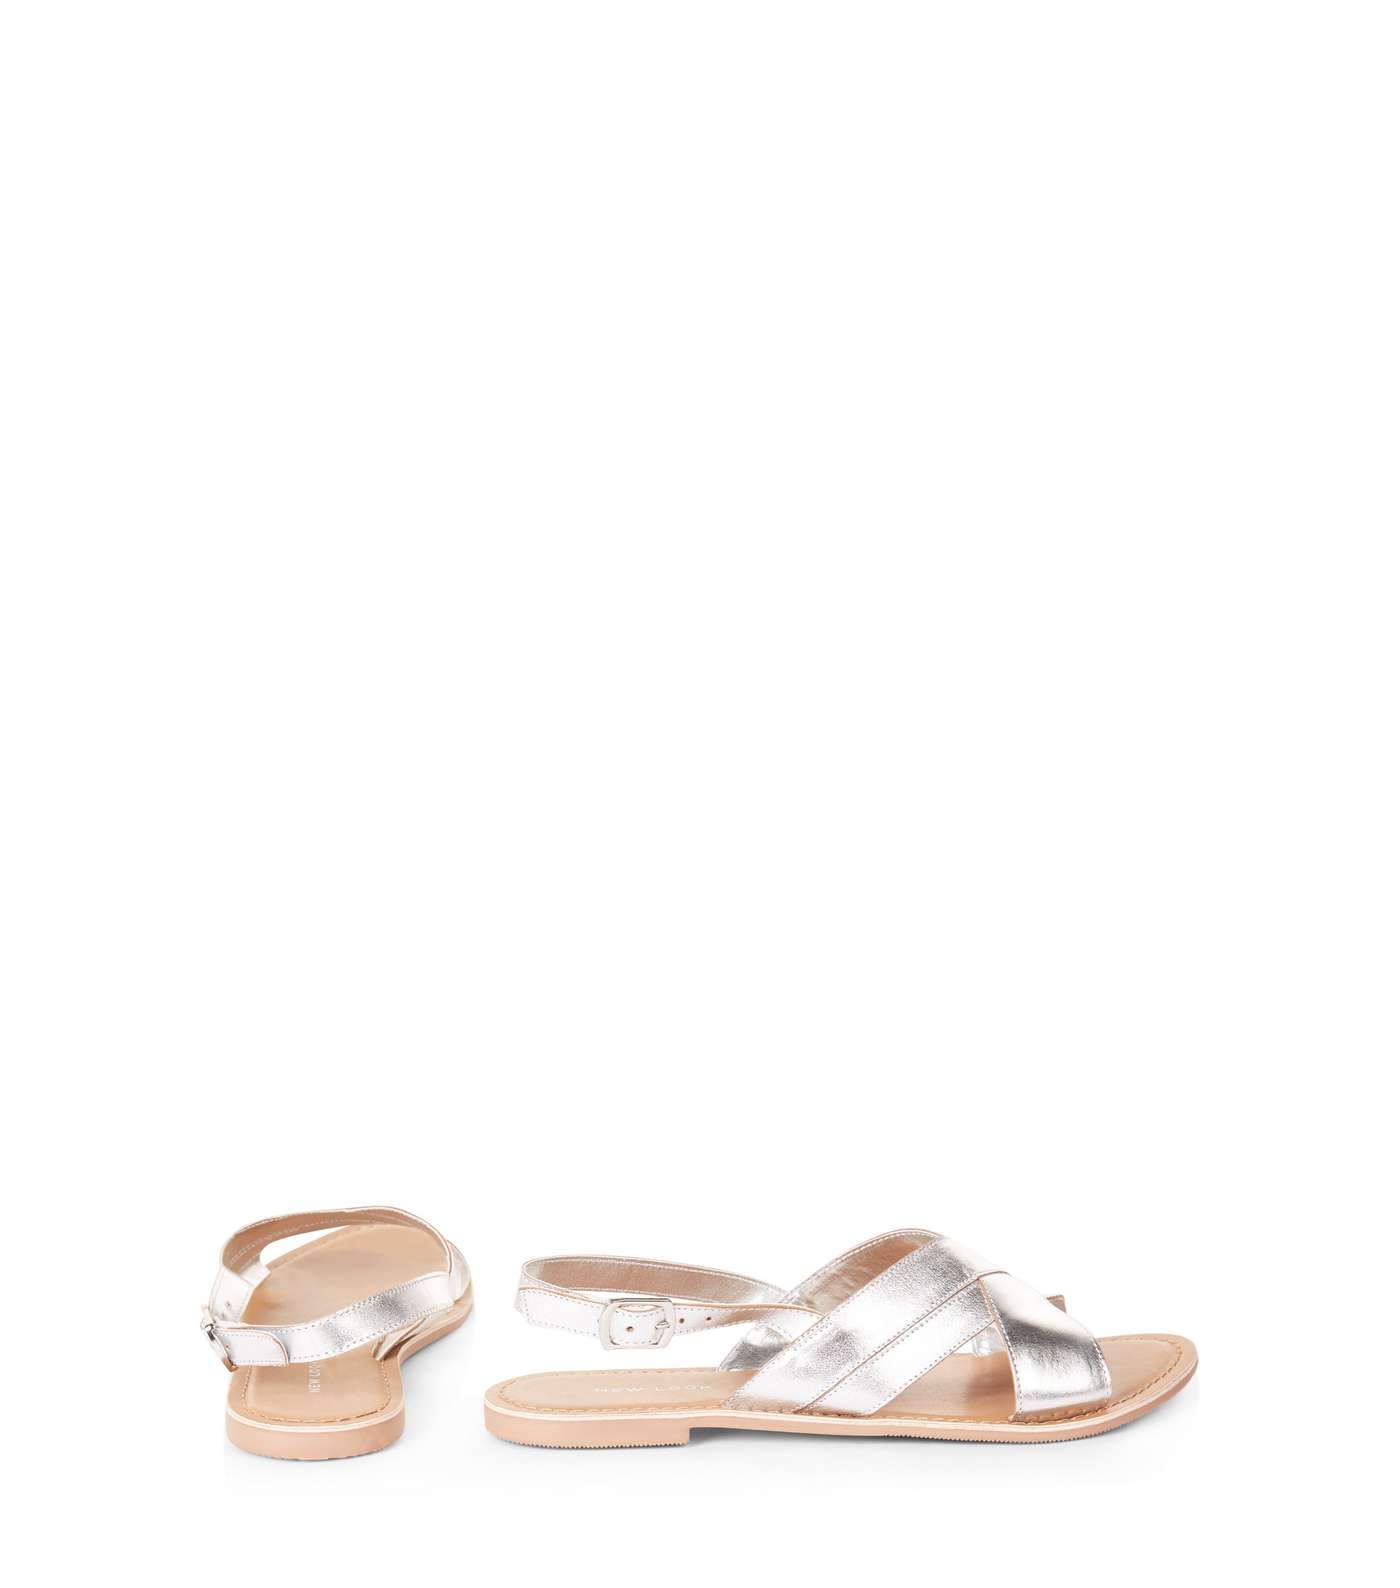 Silver Leather Cross Strap Slingback Sandals Image 4